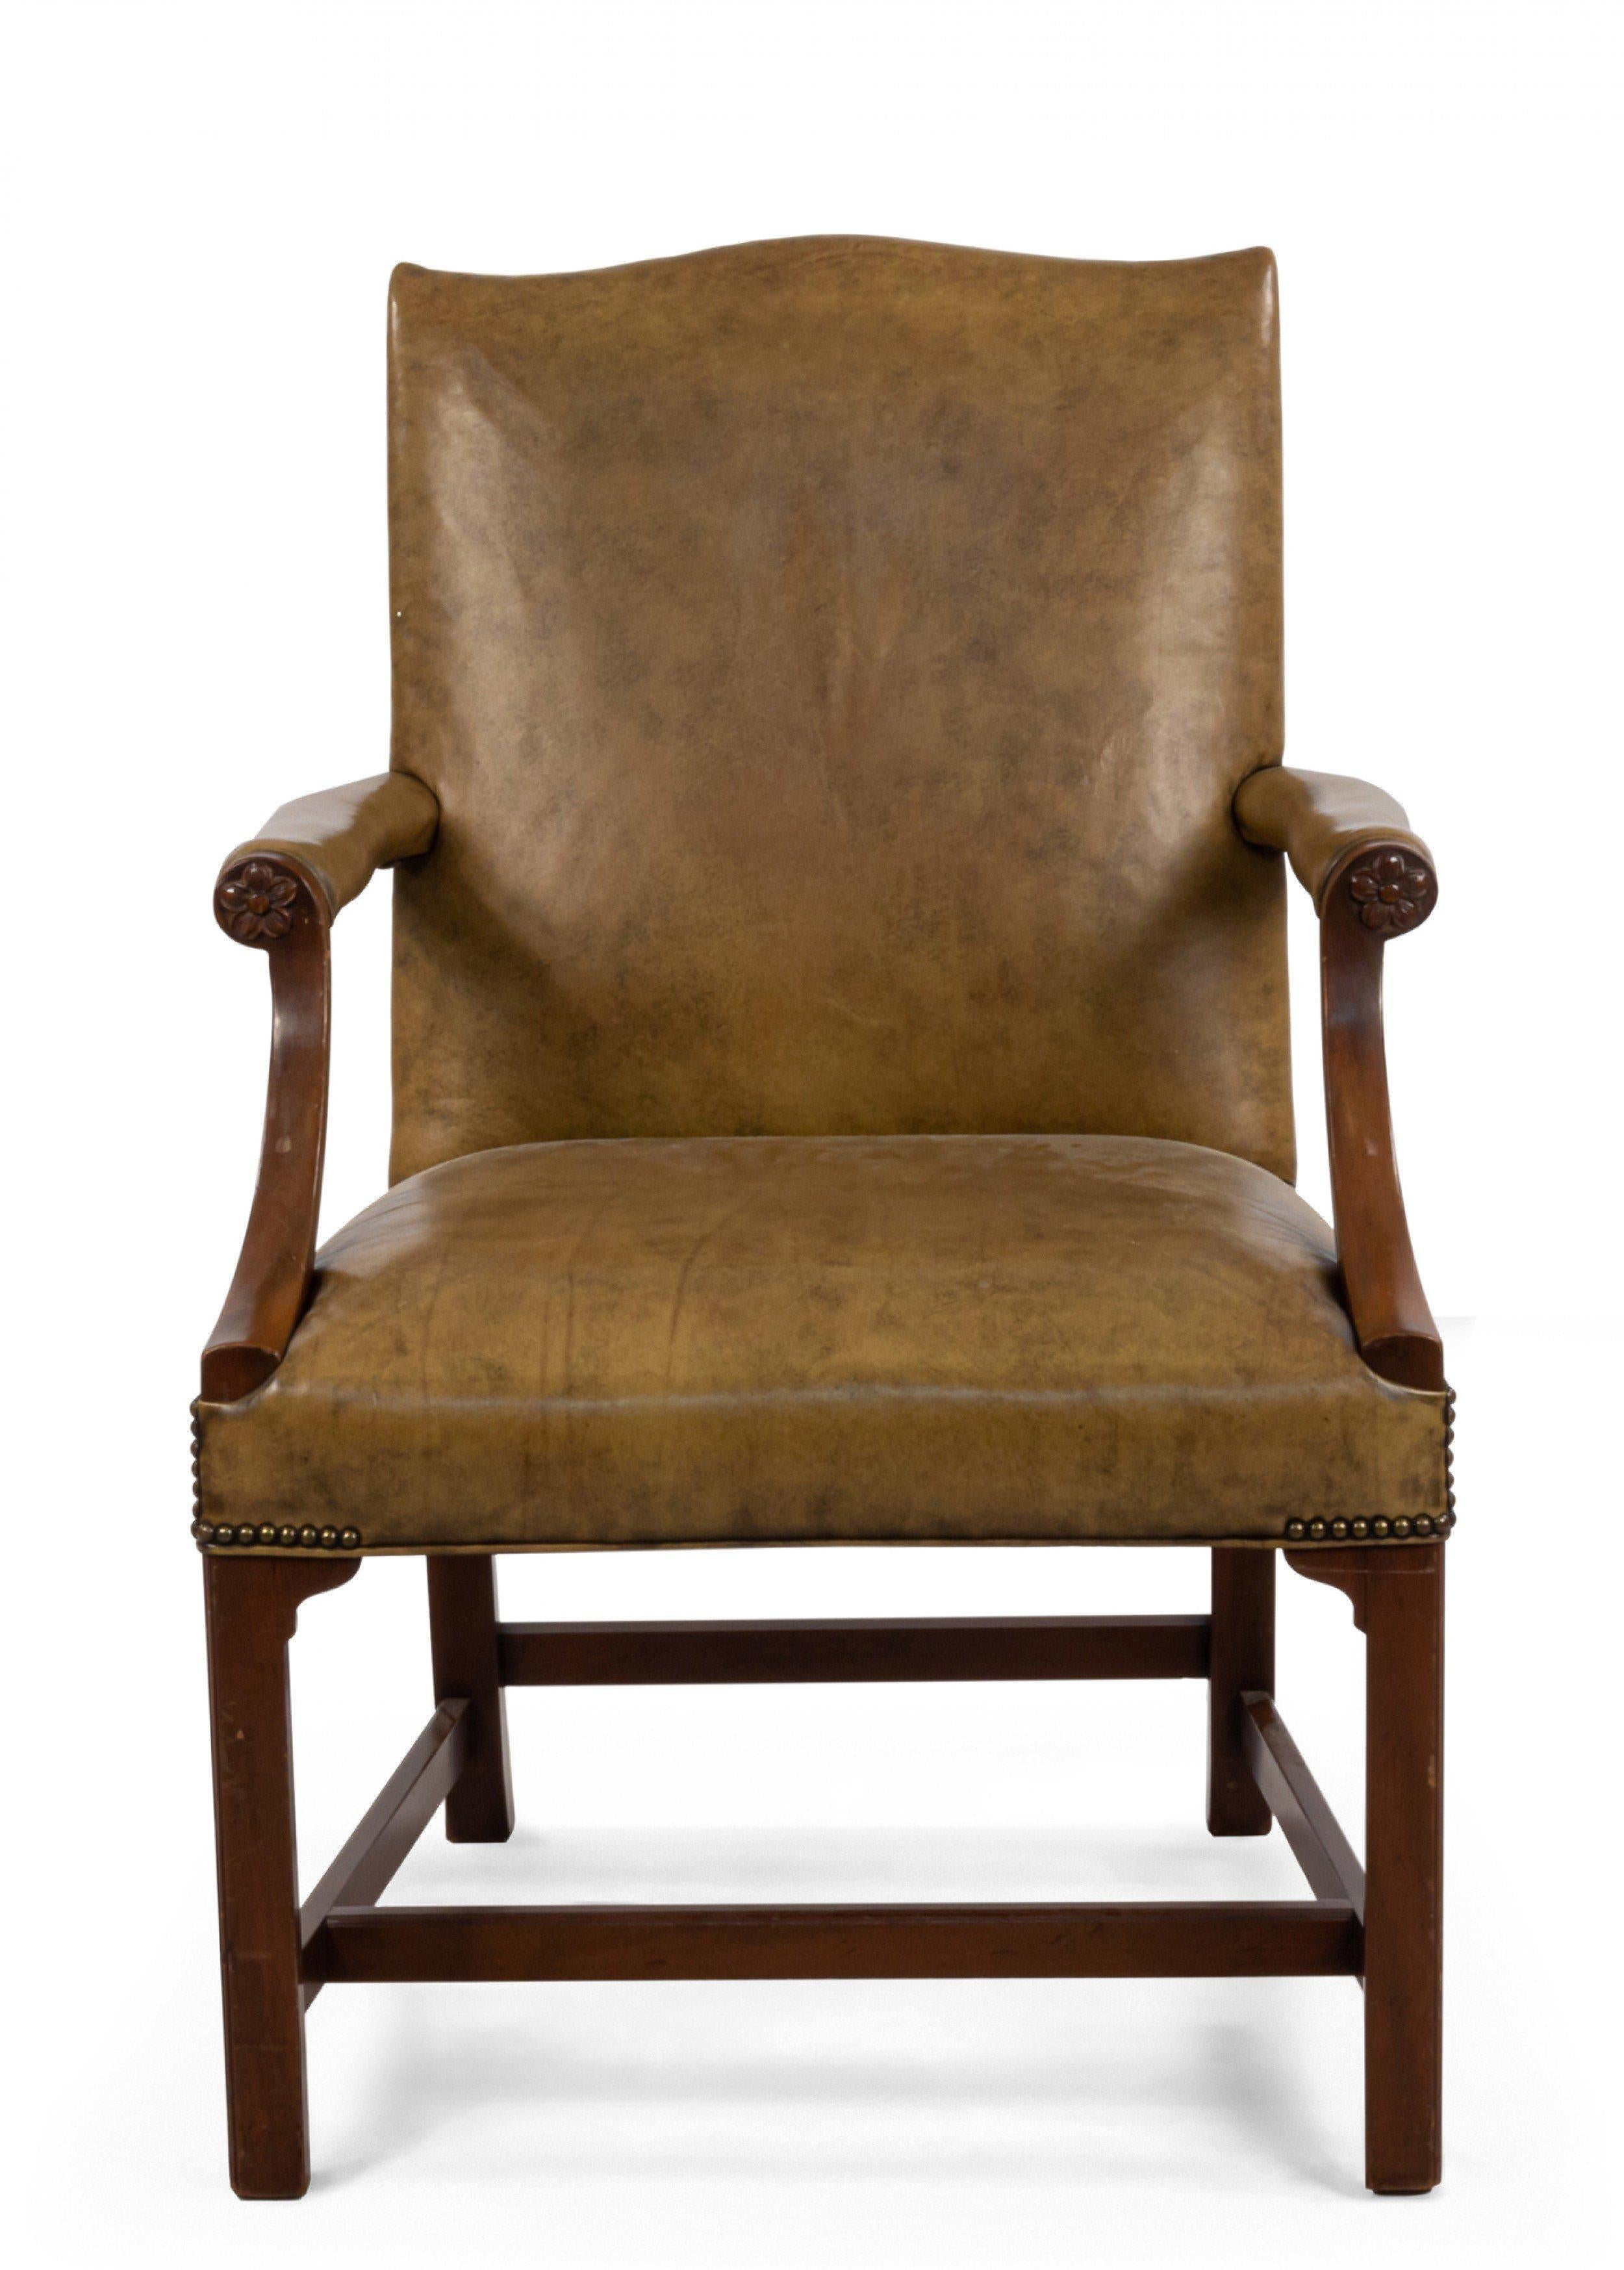 English Georgian style (20th century) armchair with tan leather seat, shaped back and arm rests with brass nail head trim and carved floral detail at arm.